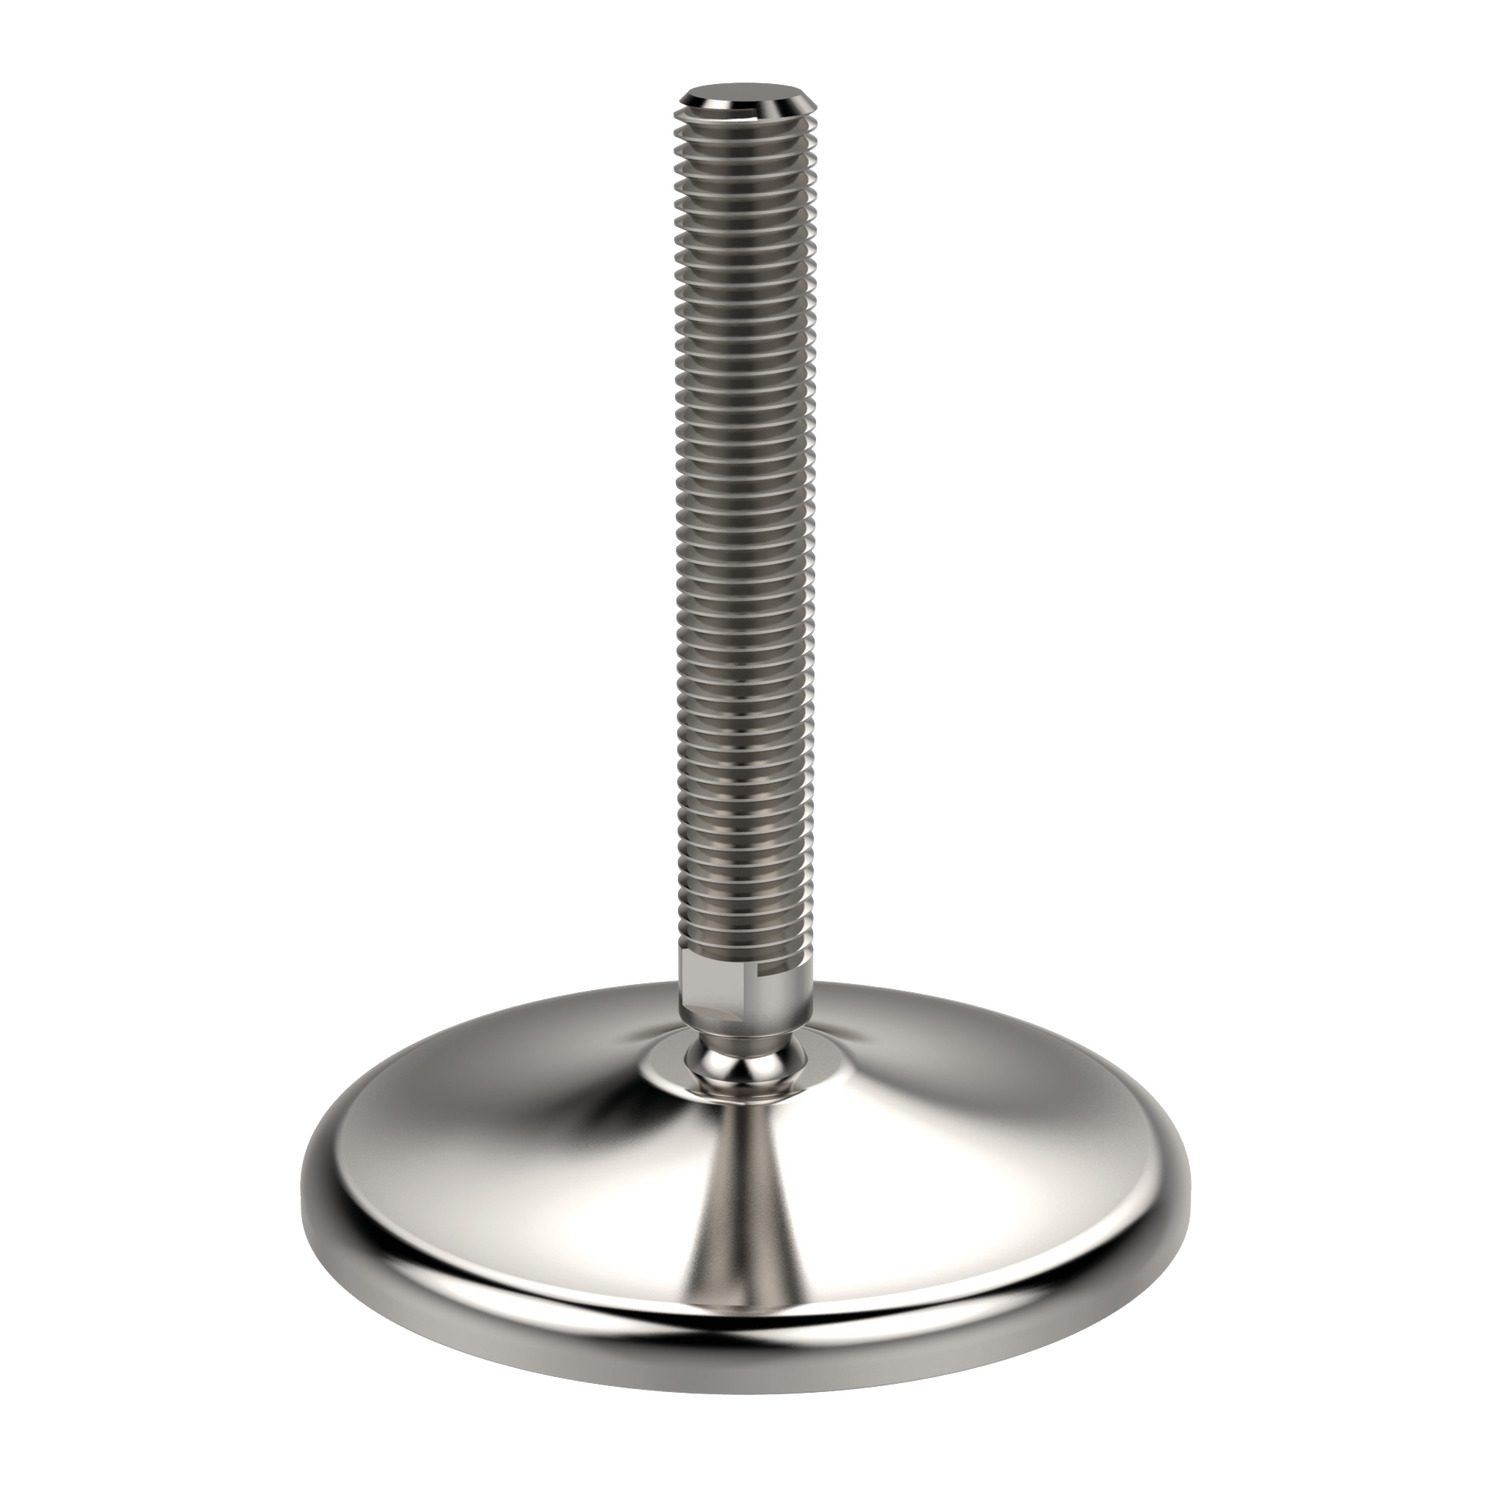 Product 34716, Levelling Feet stainless steel, heavy duty / 